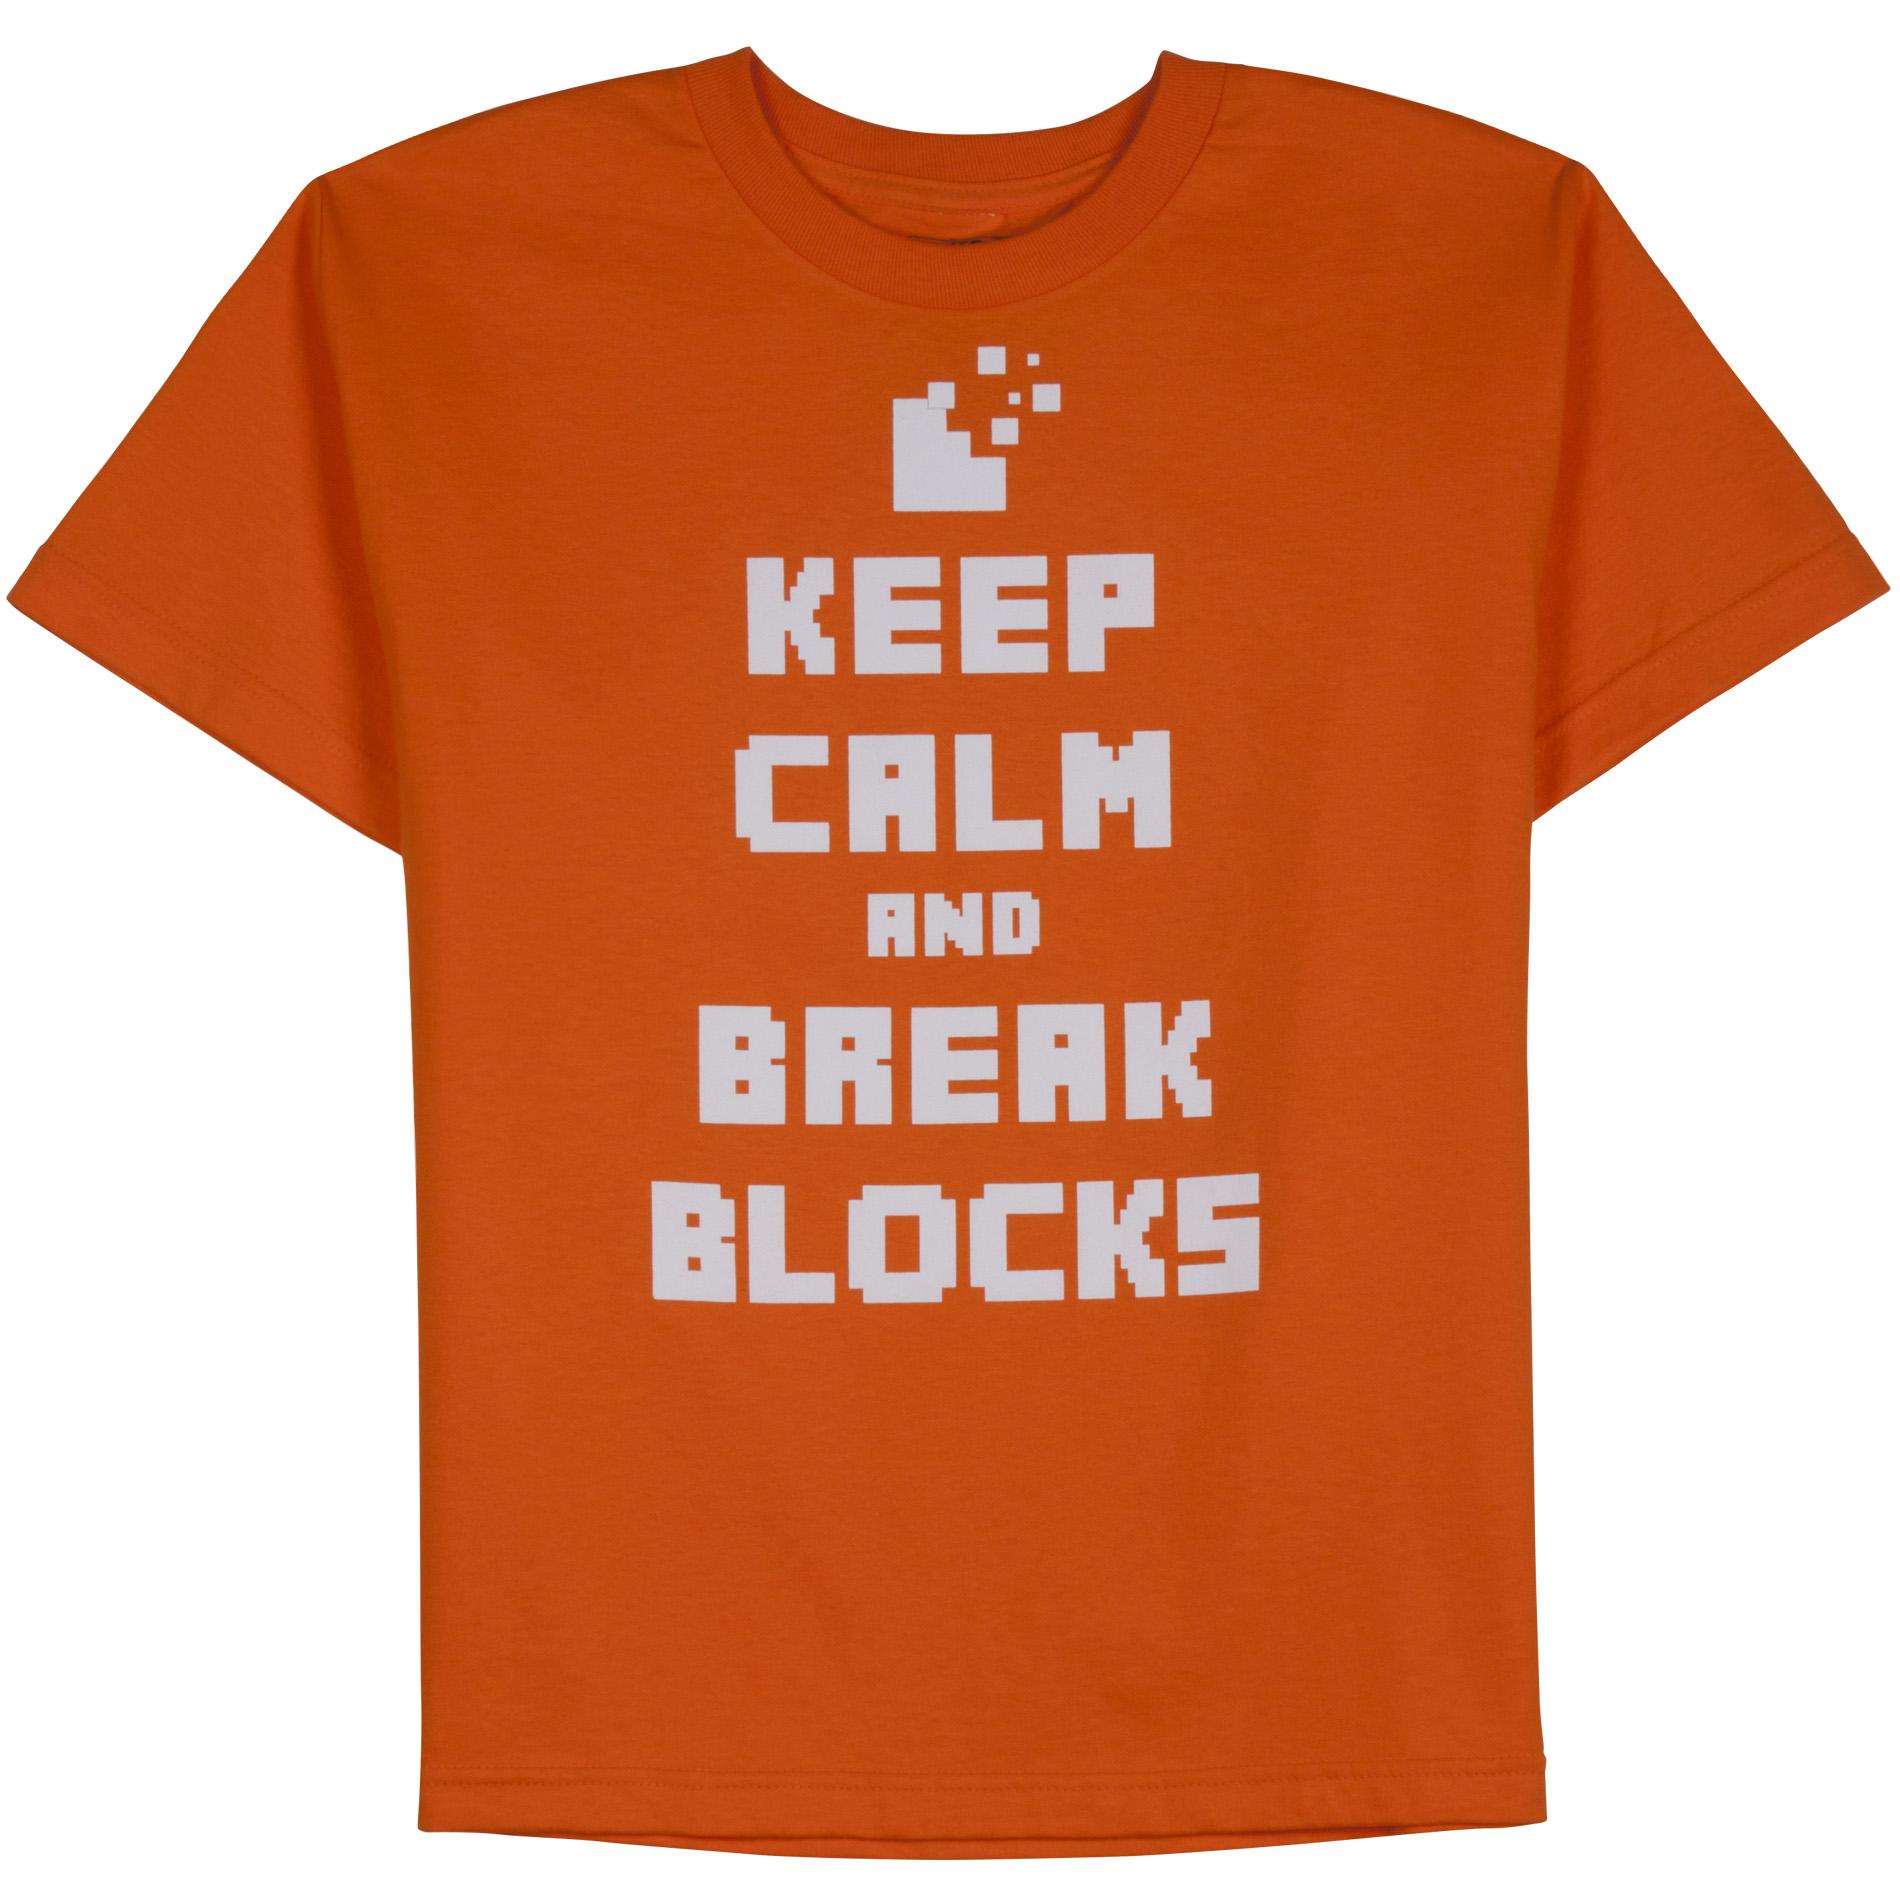 Route 66 Boy's Graphic T-Shirt - Keep Calm and Break Blocks